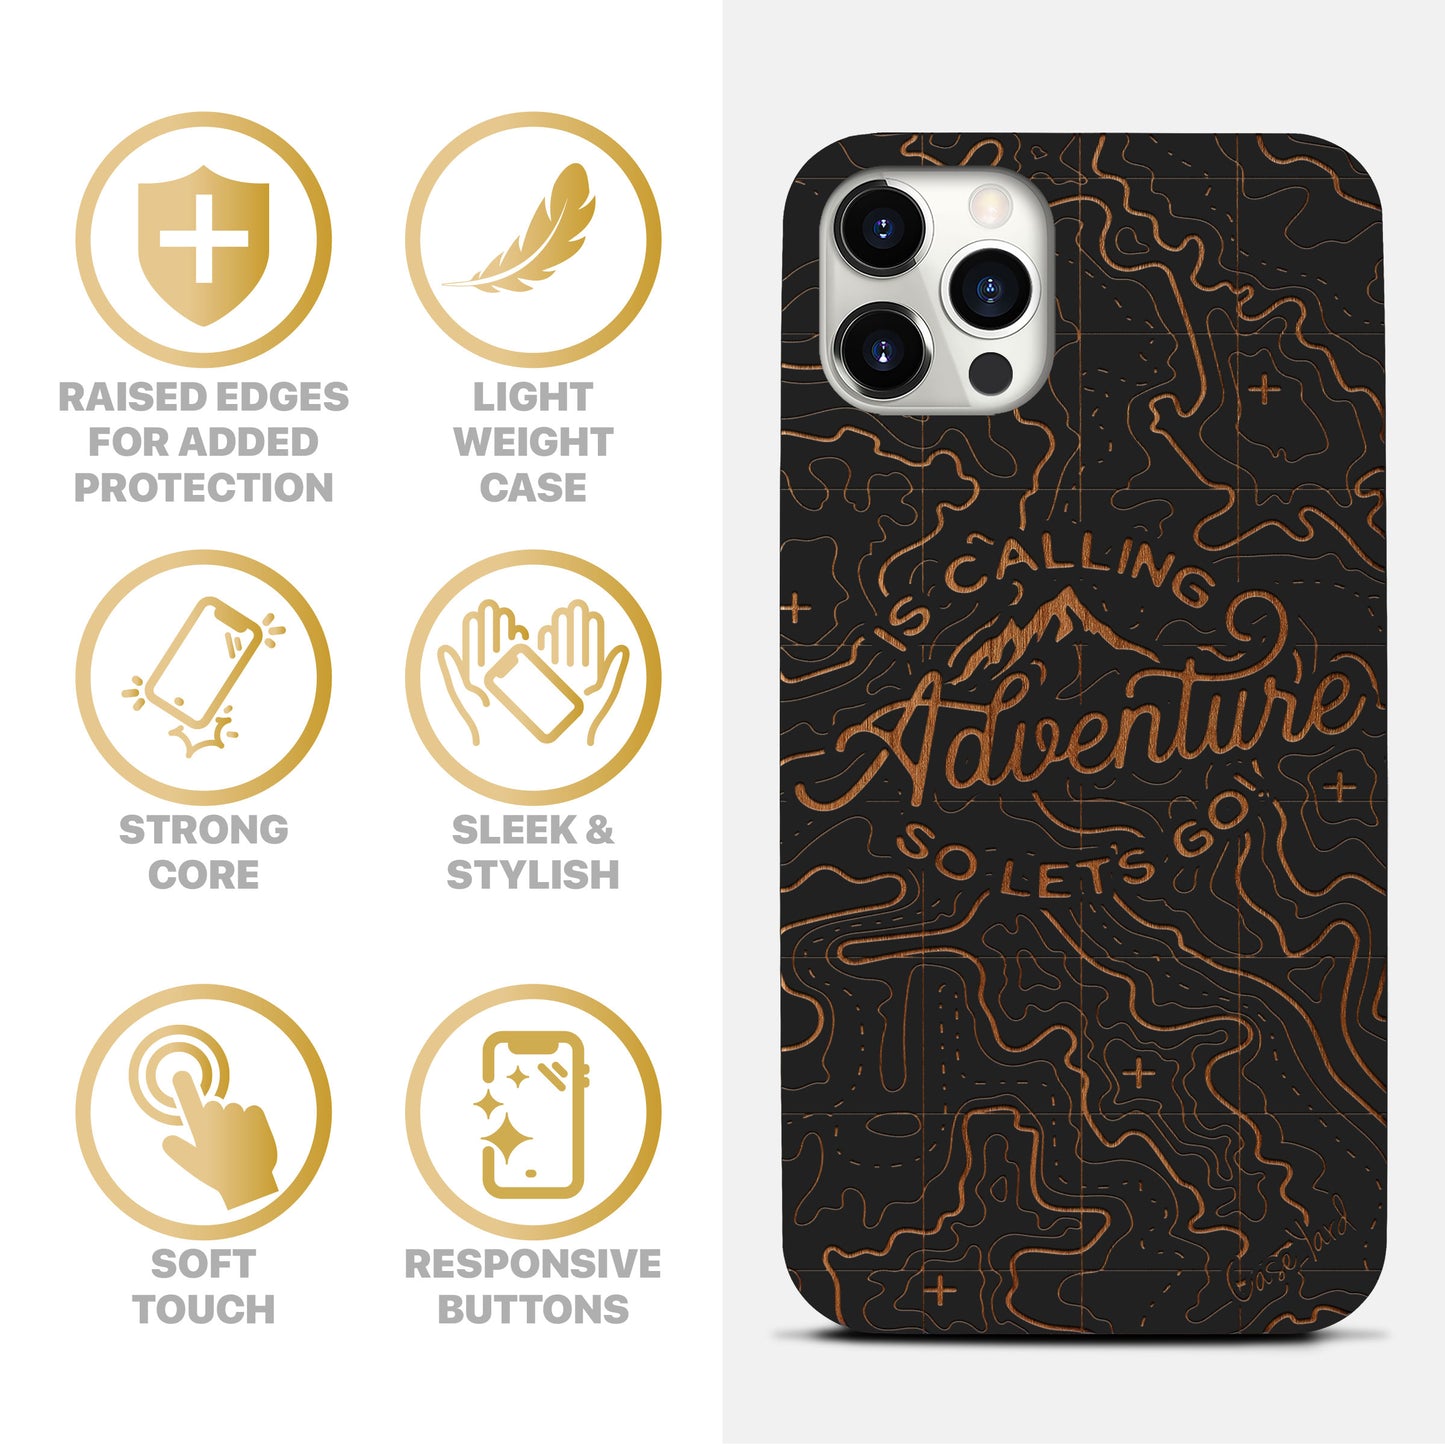 Wooden Cell Phone Case Cover, Laser Engraved case for iPhone & Samsung phone Adventure Design